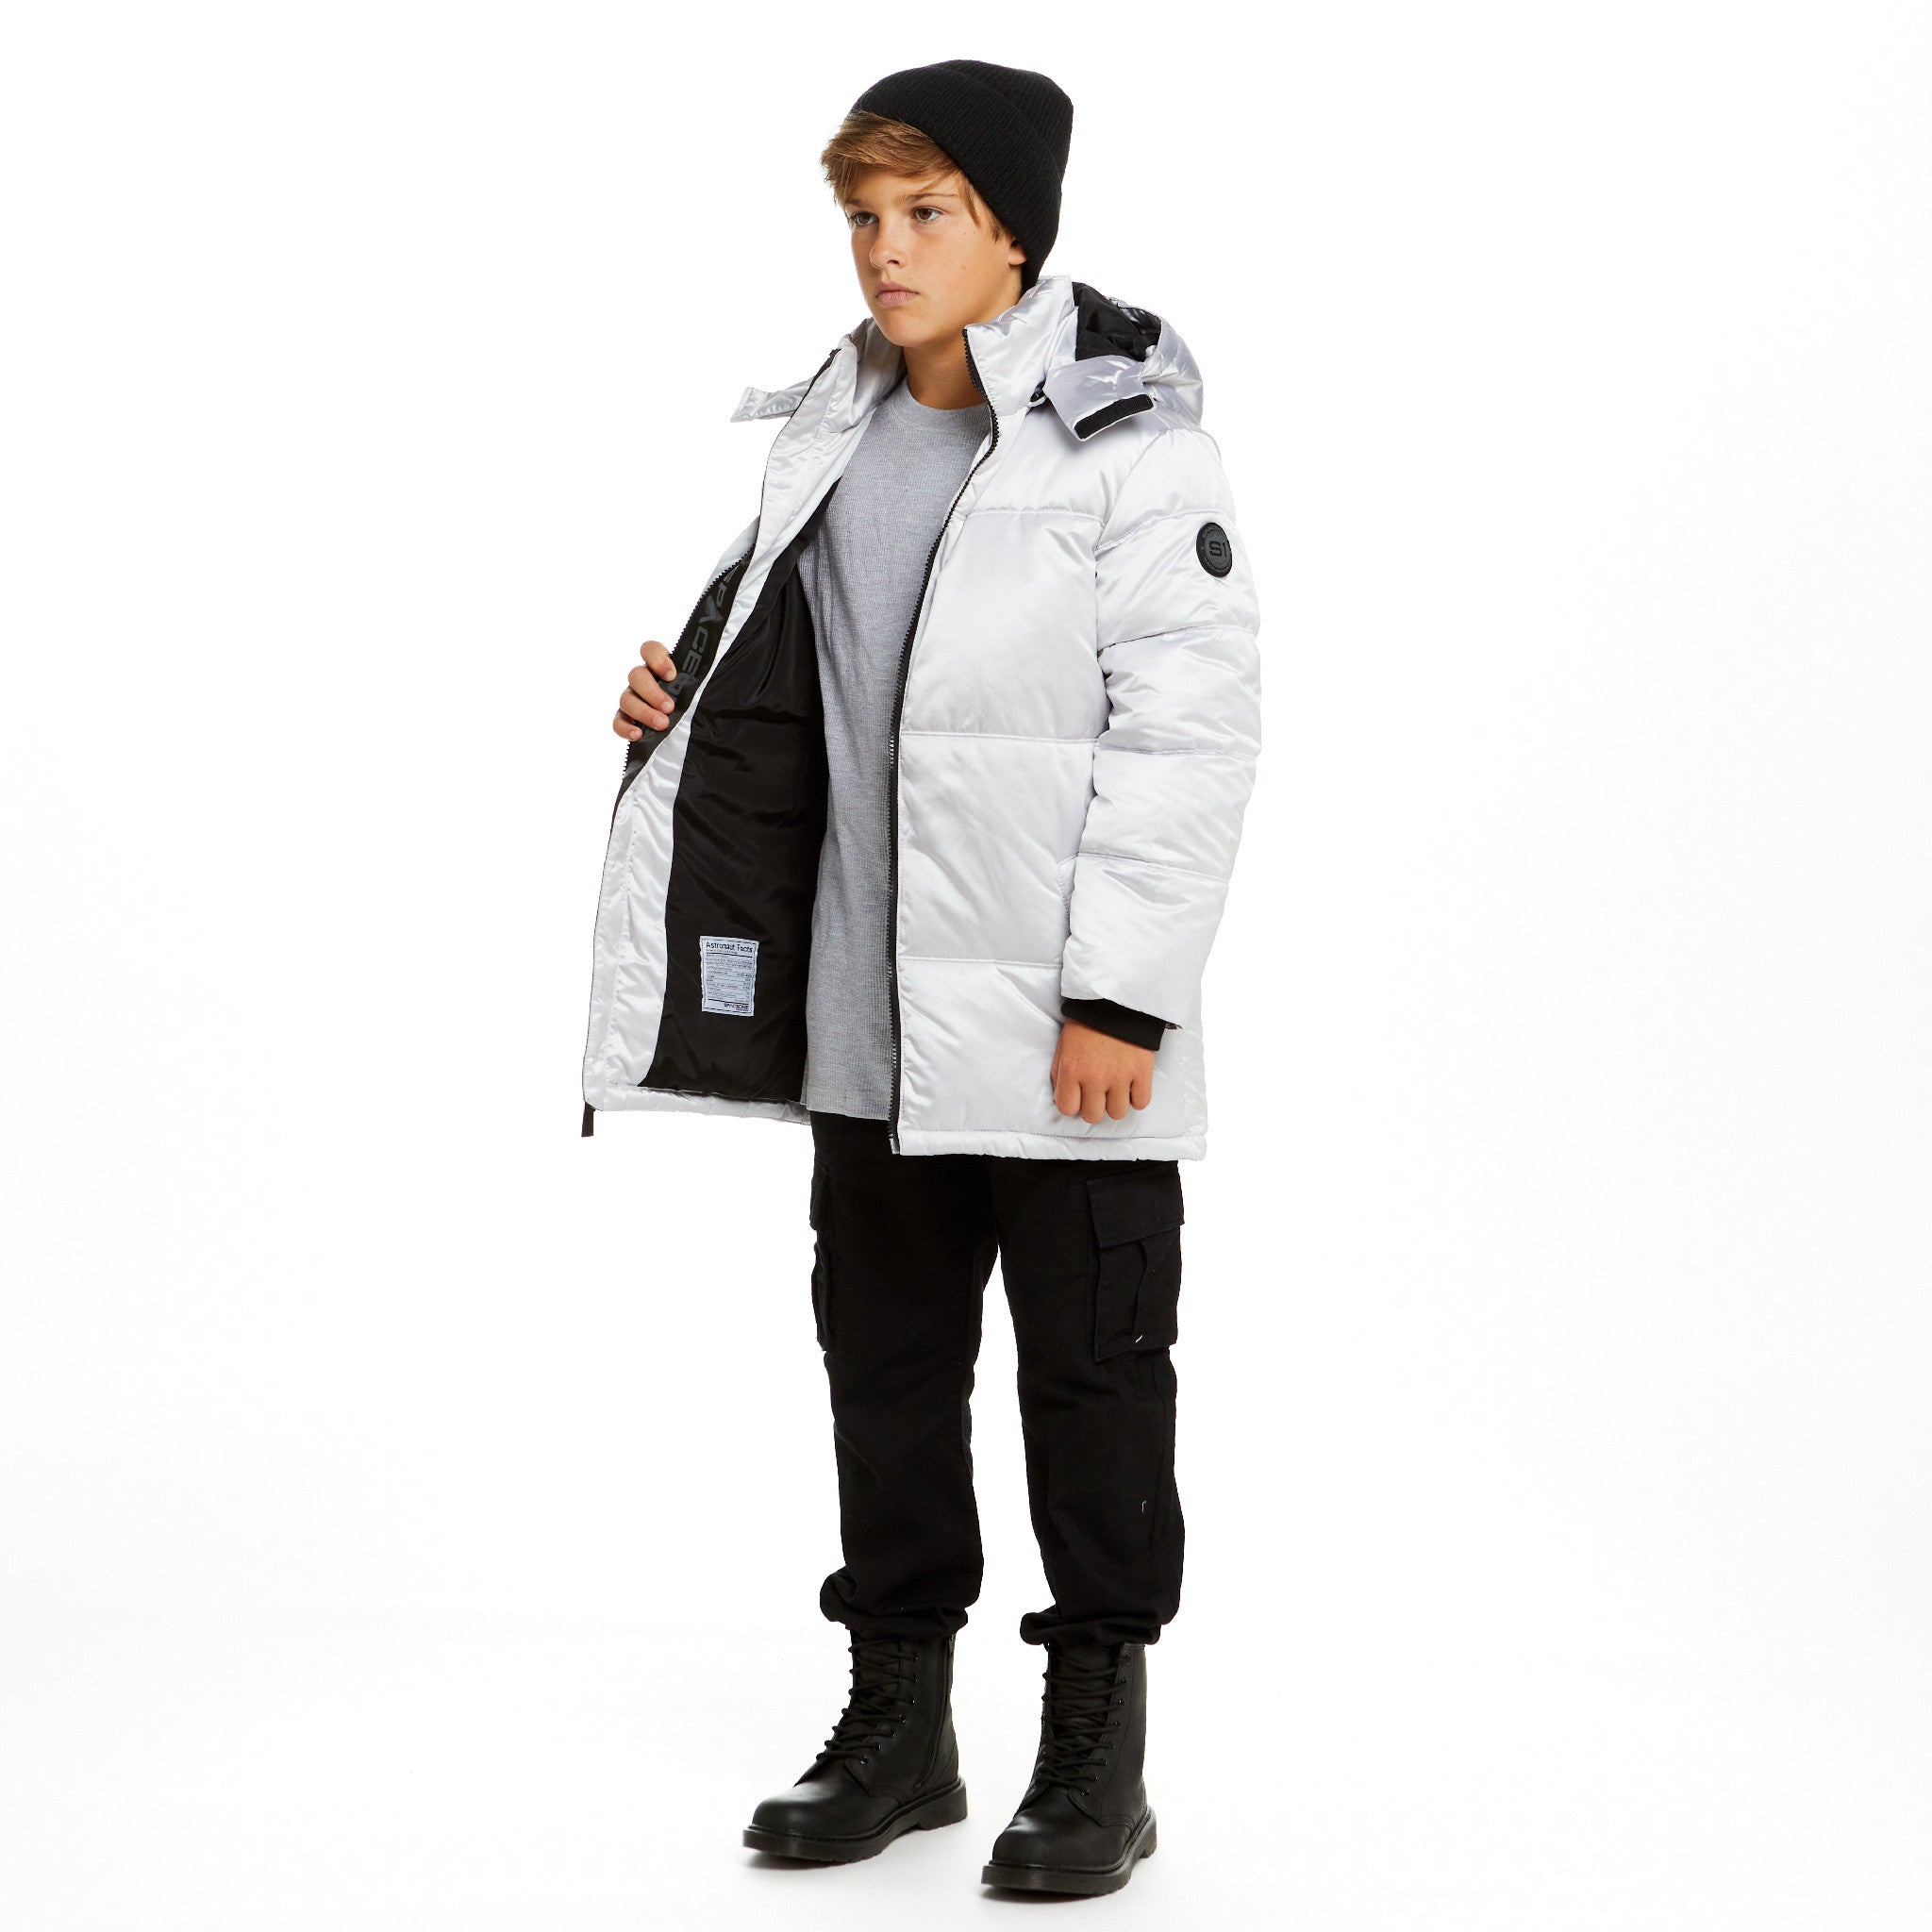 SPACEONE x Andy & Evan®| Galactic Puffer Jacket | Galaxy White